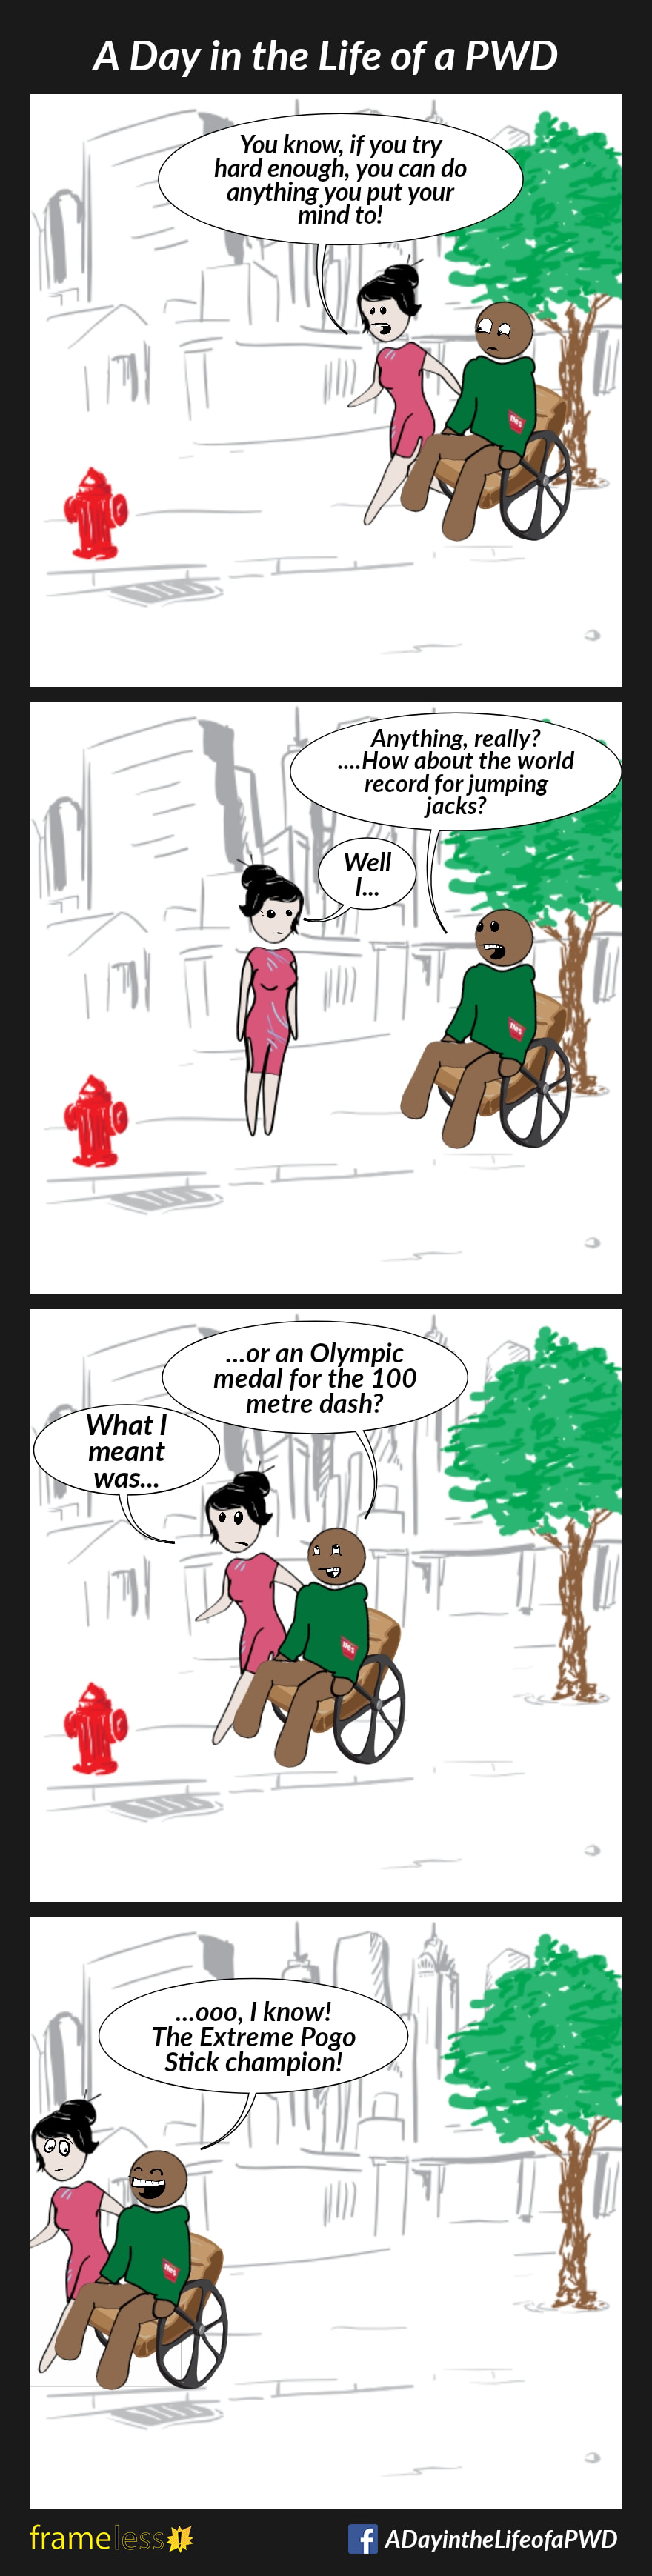 COMIC STRIP 
A Day in the Life of a PWD (Person With a Disability) 

Frame 1:
A man in a wheelchair is traveling down a sidewalk. His friend walks beside him.
FRIEND: You know, if you try hard enough, you can do anything you put your mind to!

Frame 2:
MAN: Anything, really?...How about the world record for jumping jacks?
FRIEND: Well, I...

Frame 3:
MAN: ...or an Olympic medal for the 100 meter dash?
FRIEND: What I meant was...

Frame 4:
MAN: ...ooo, I know! The Extreme Pogo Stick Champion!